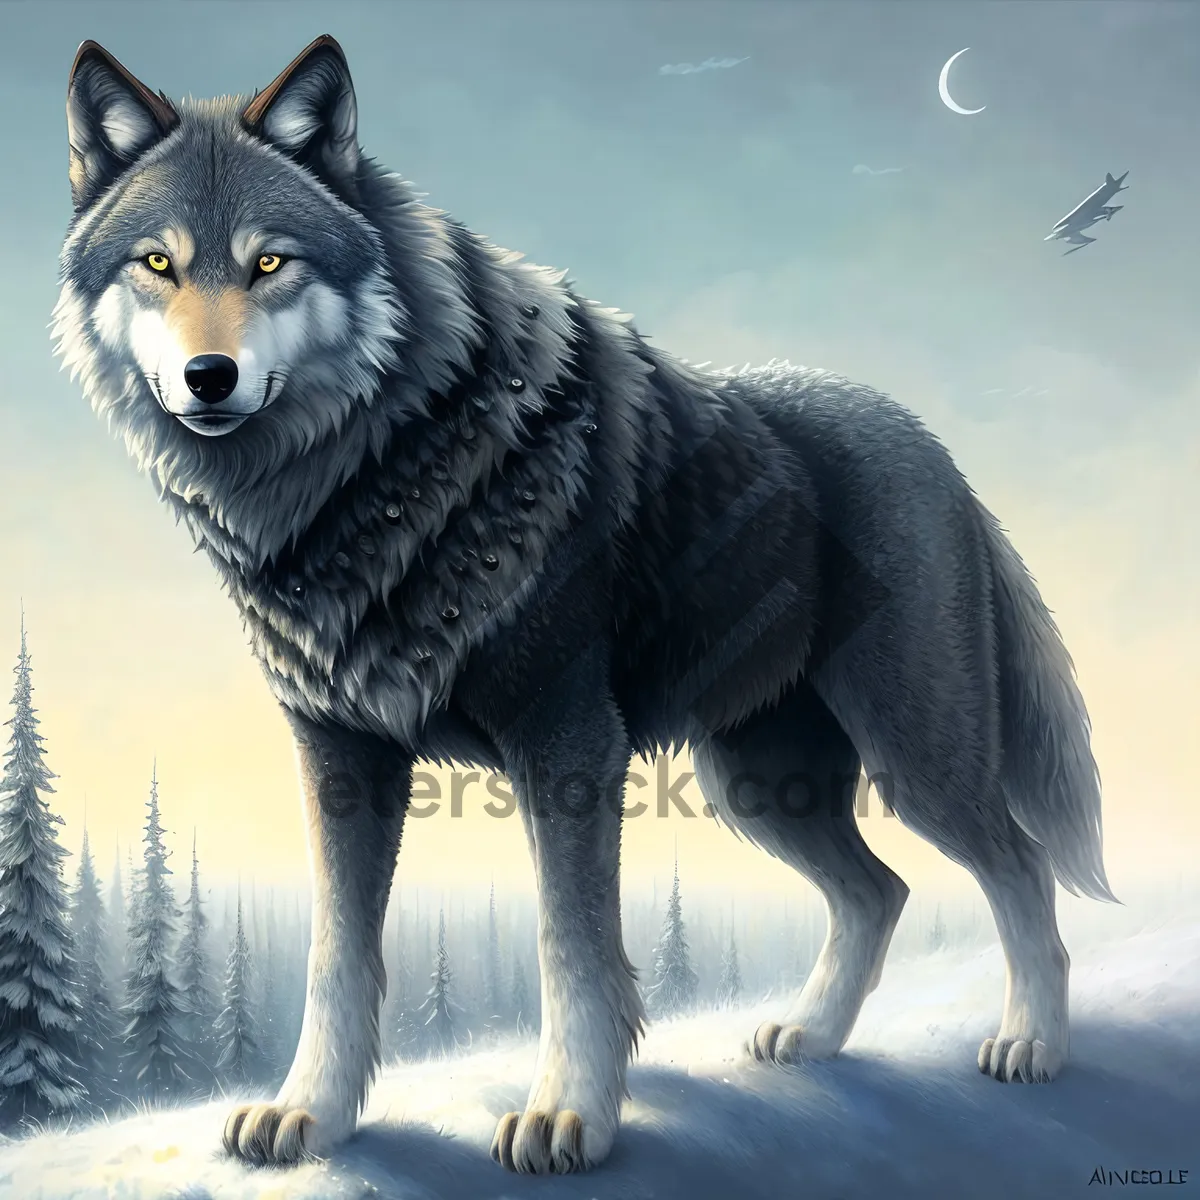 Picture of White Timber Wolf in Winter Wilderness